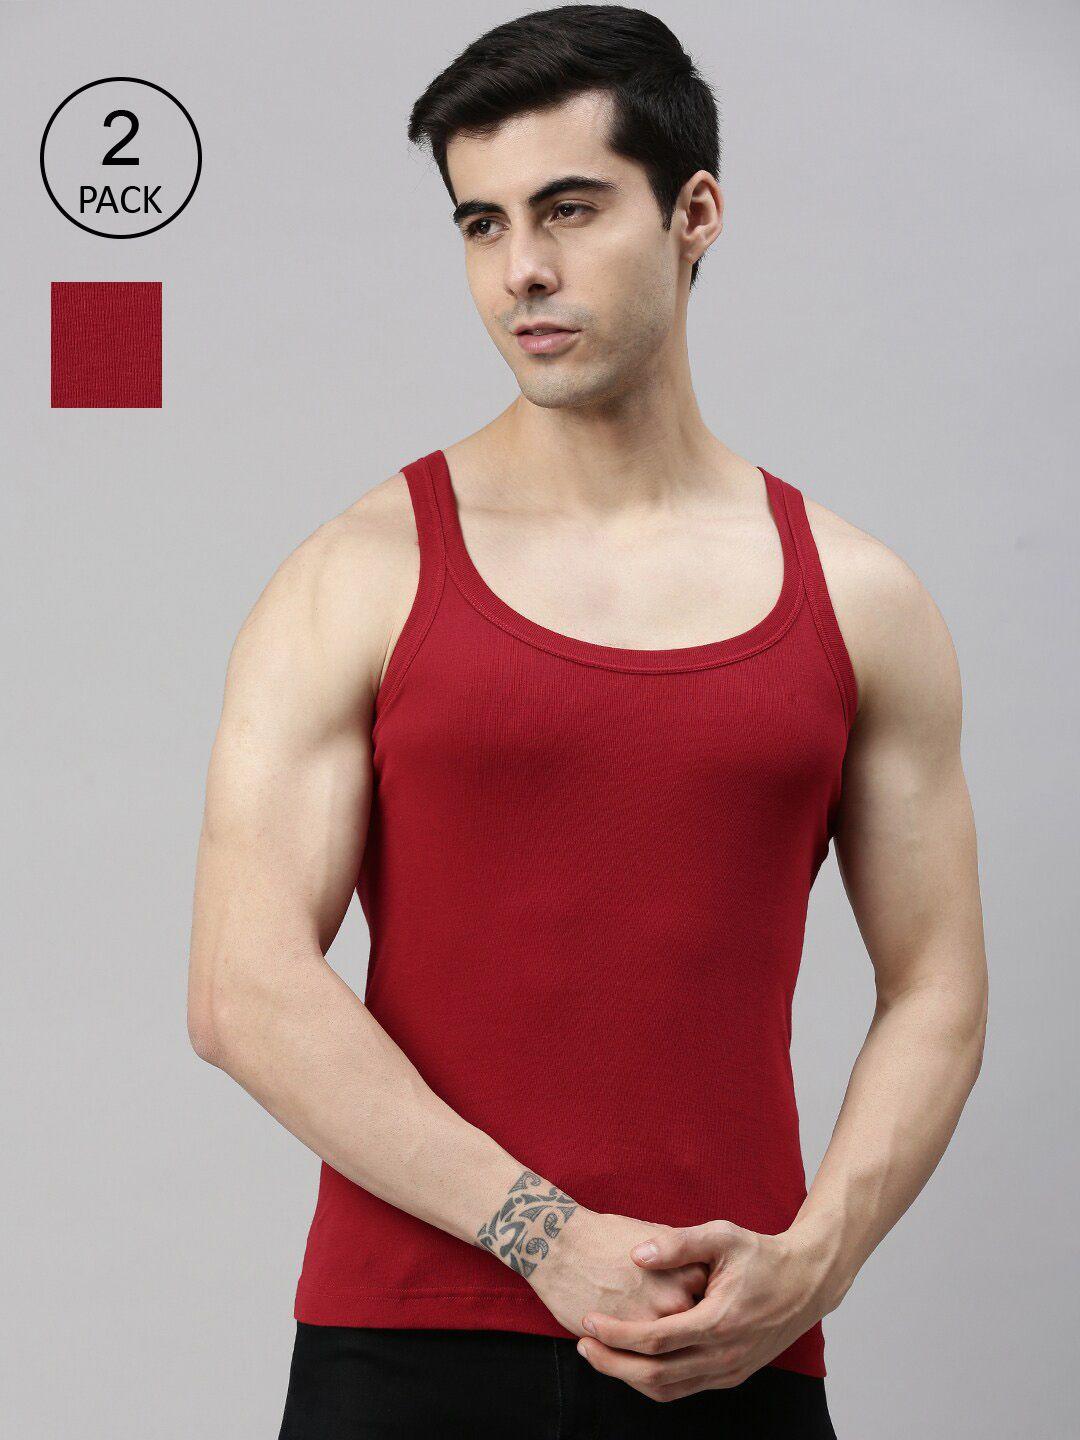 lux cozi men pack of 2 solid organic cotton innerwear vests